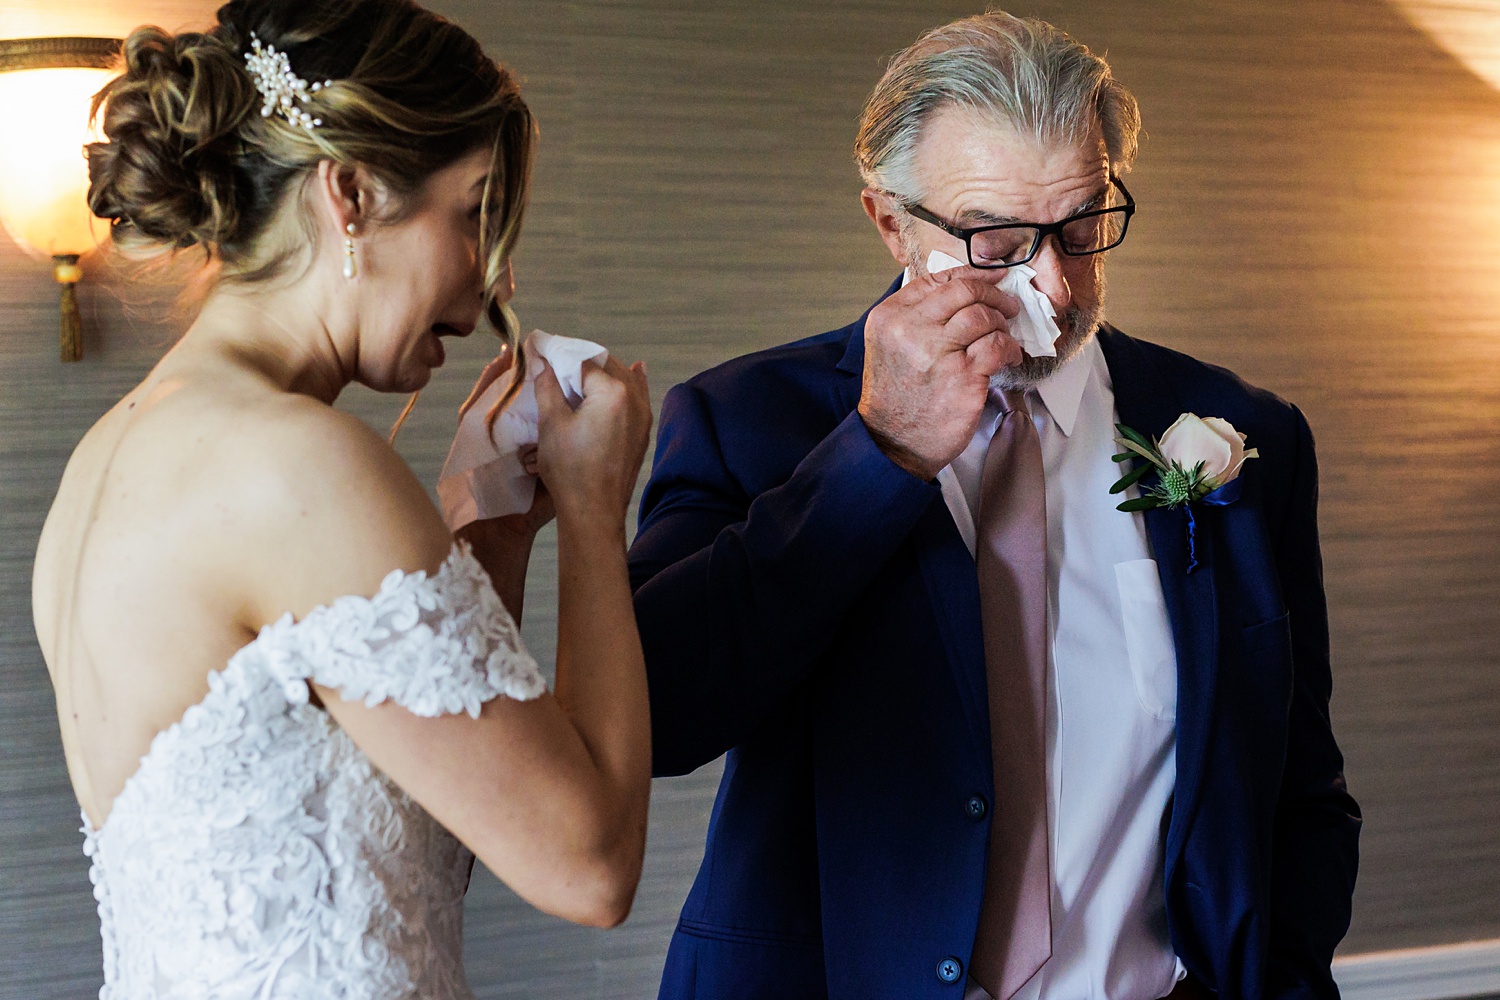 Tears as the father of the bride sees his daughter on her wedding day 